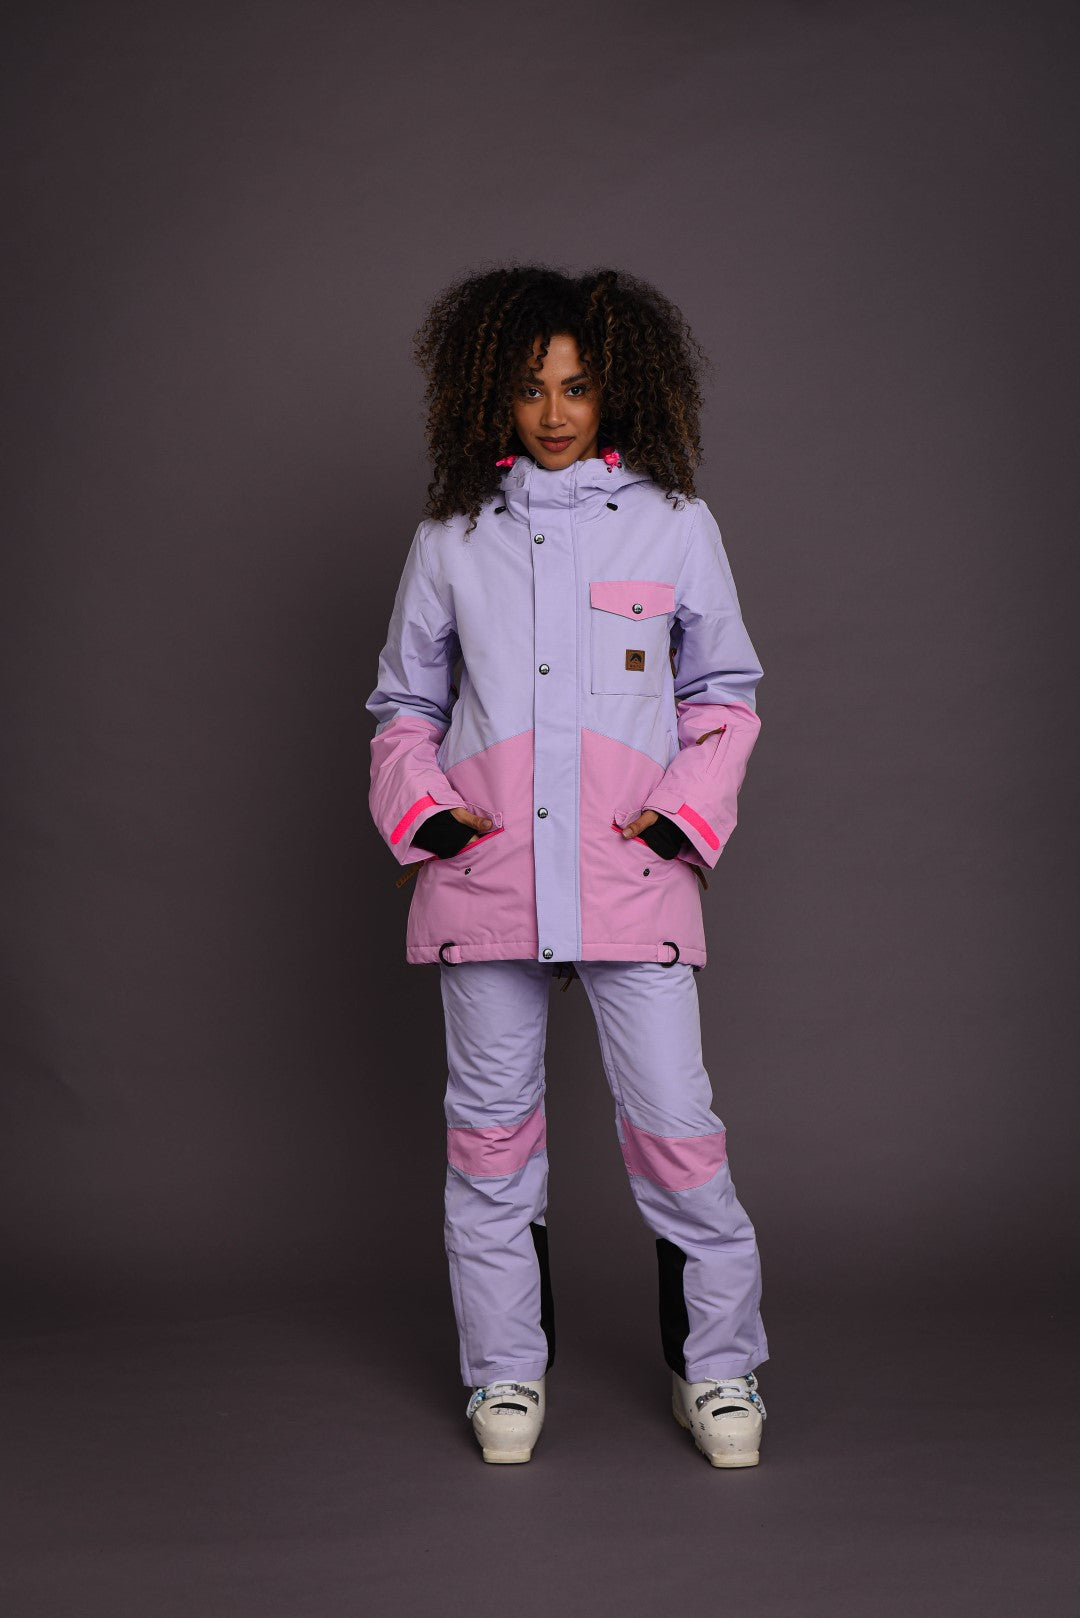 womens purple and pink ski outfit